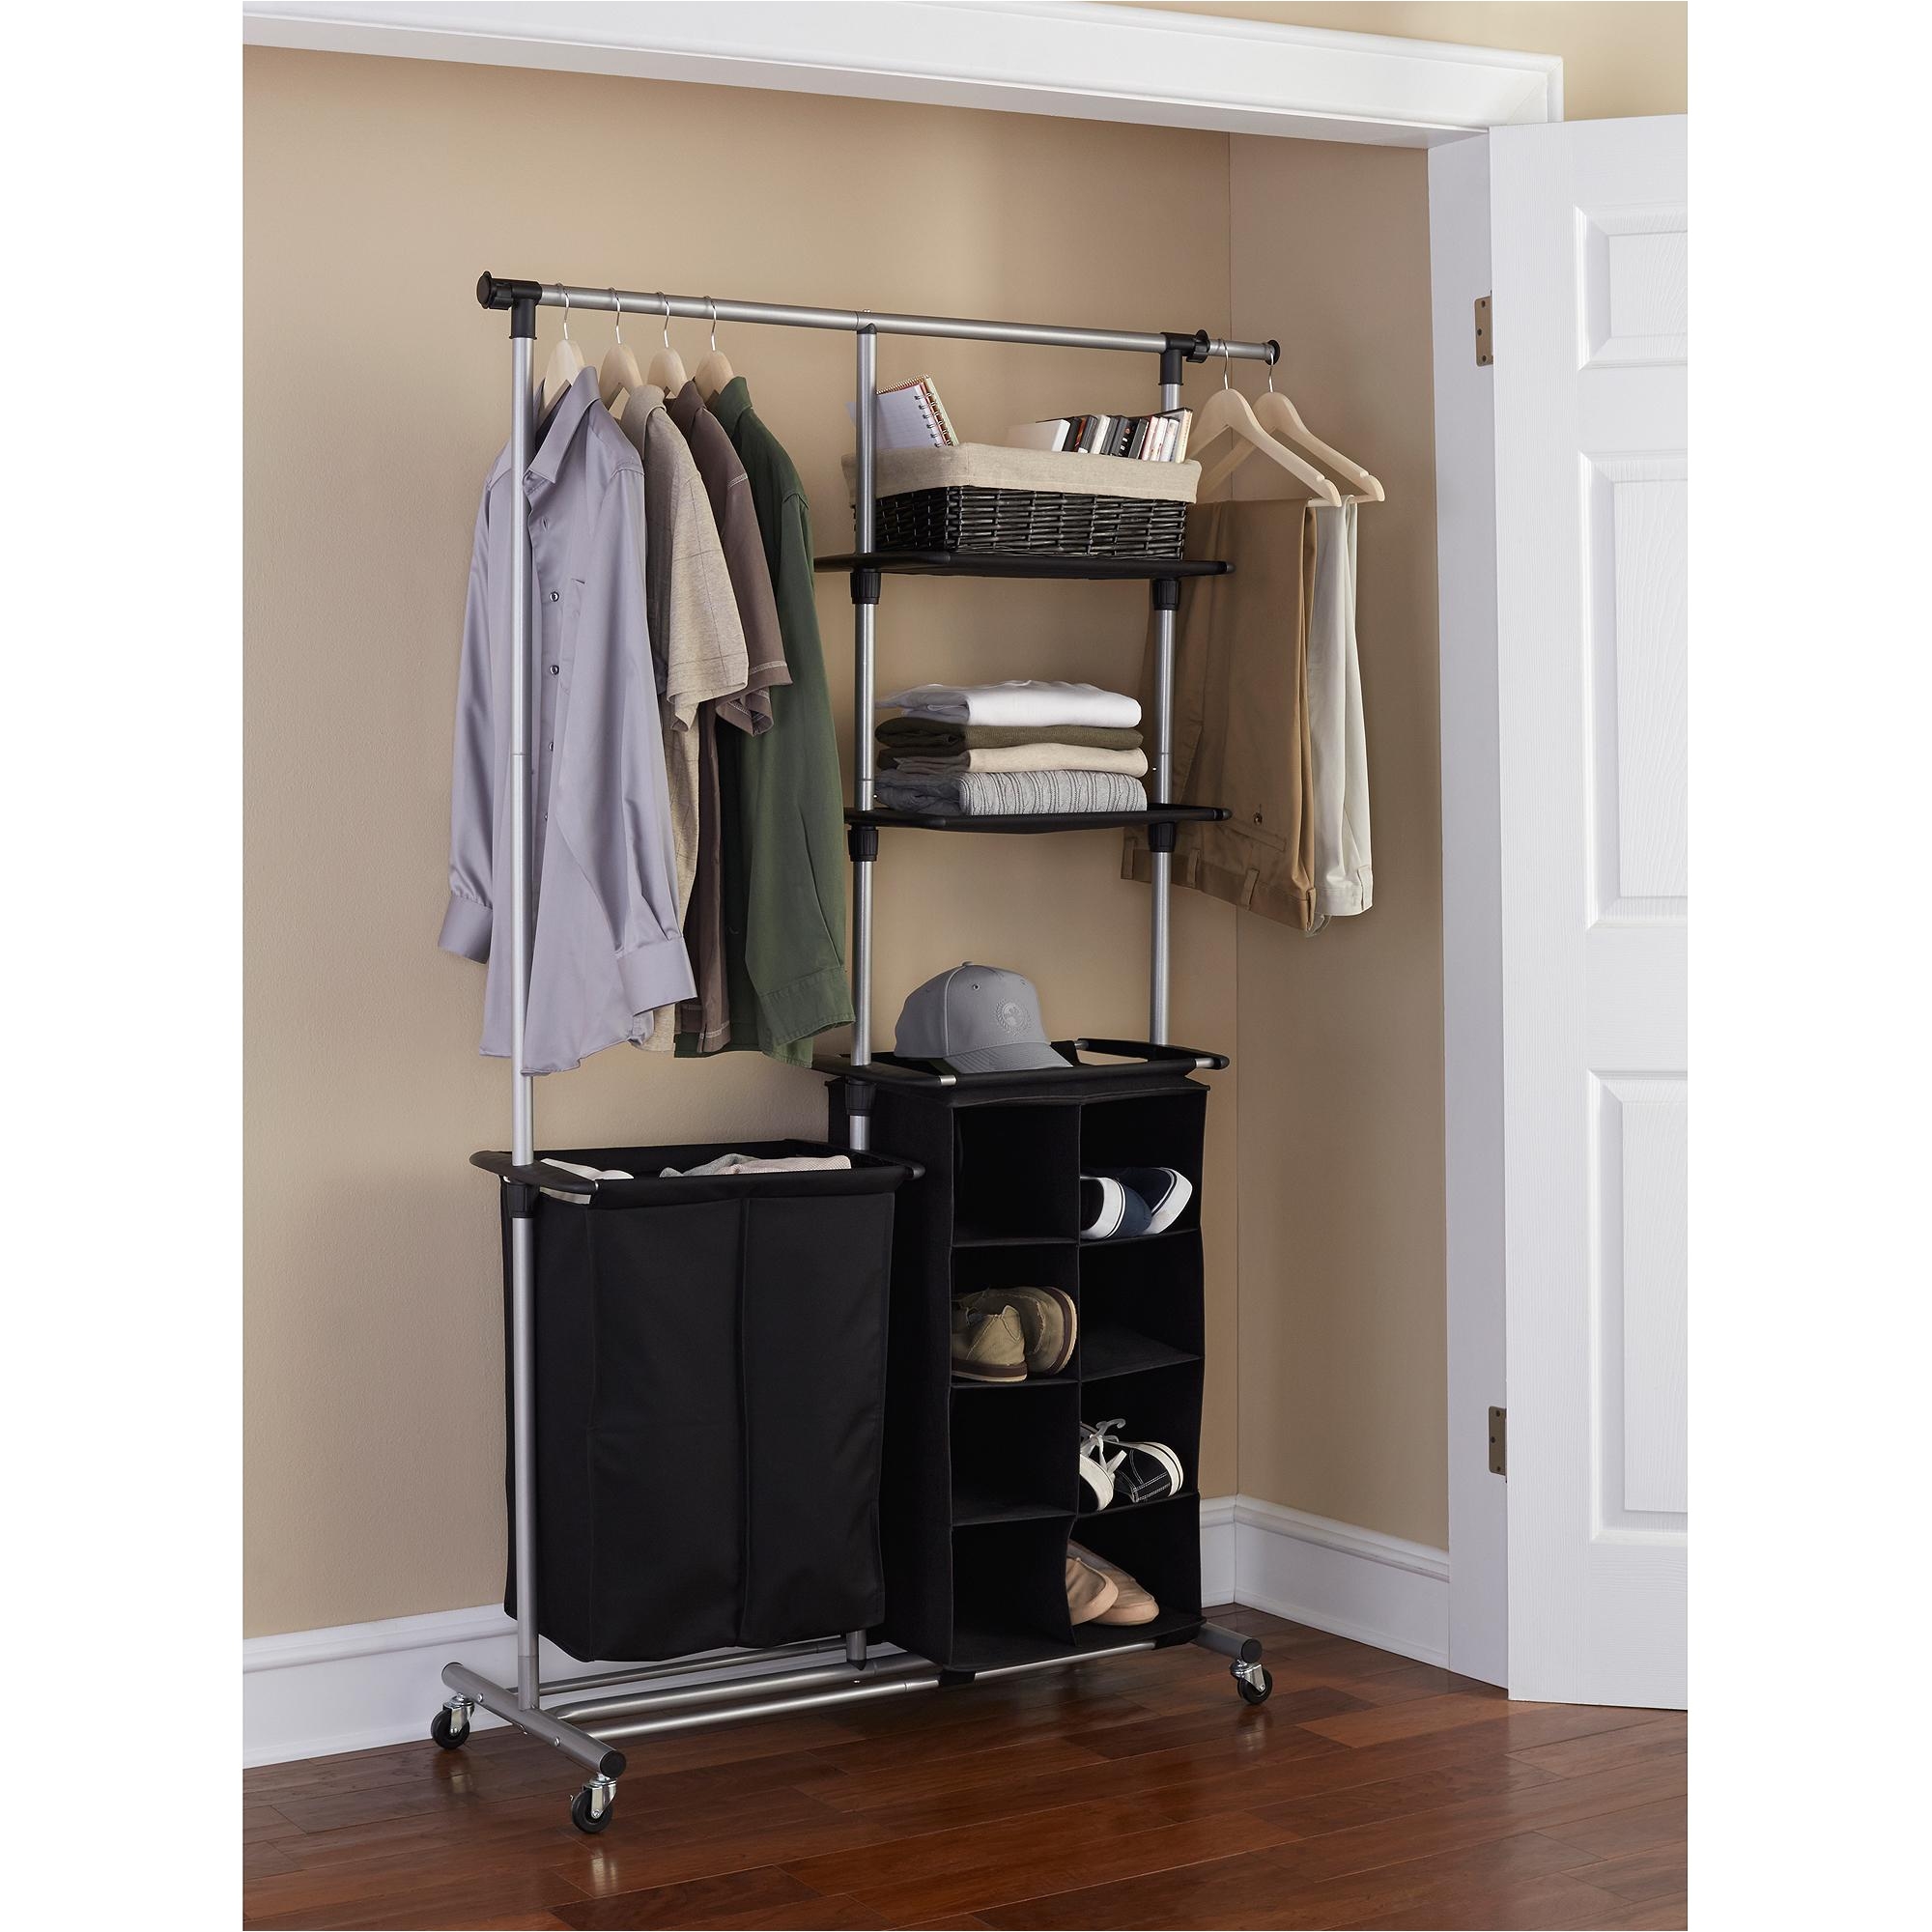 calm freestanding clothing racks together with keep your wardrobe and check in clothes